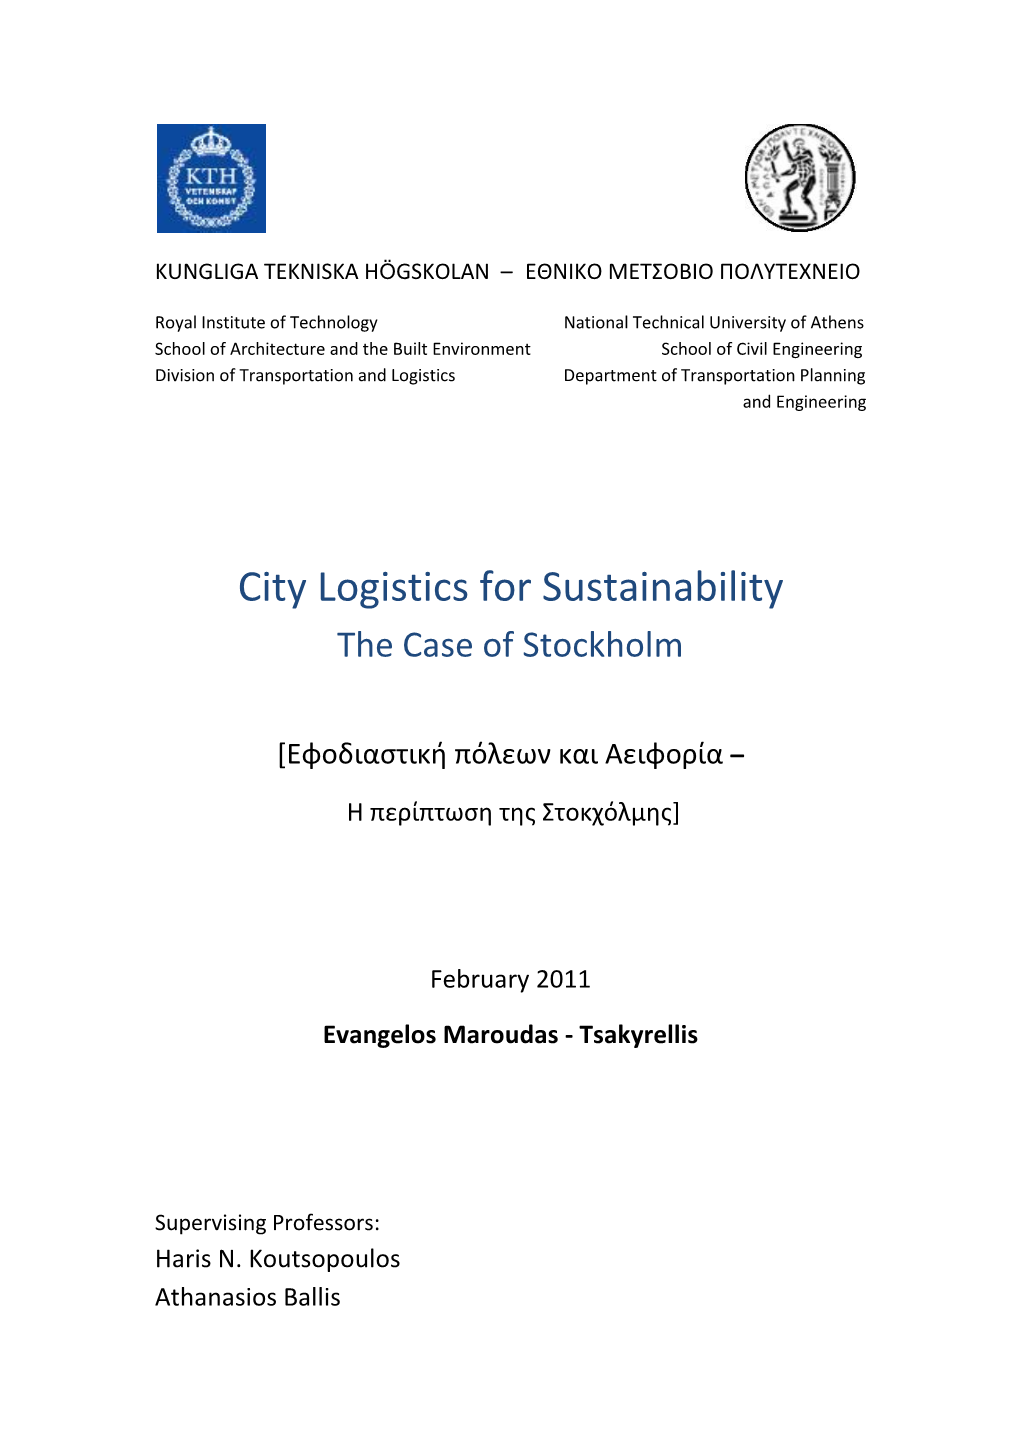 City Logistics for Sustainability the Case of Stockholm